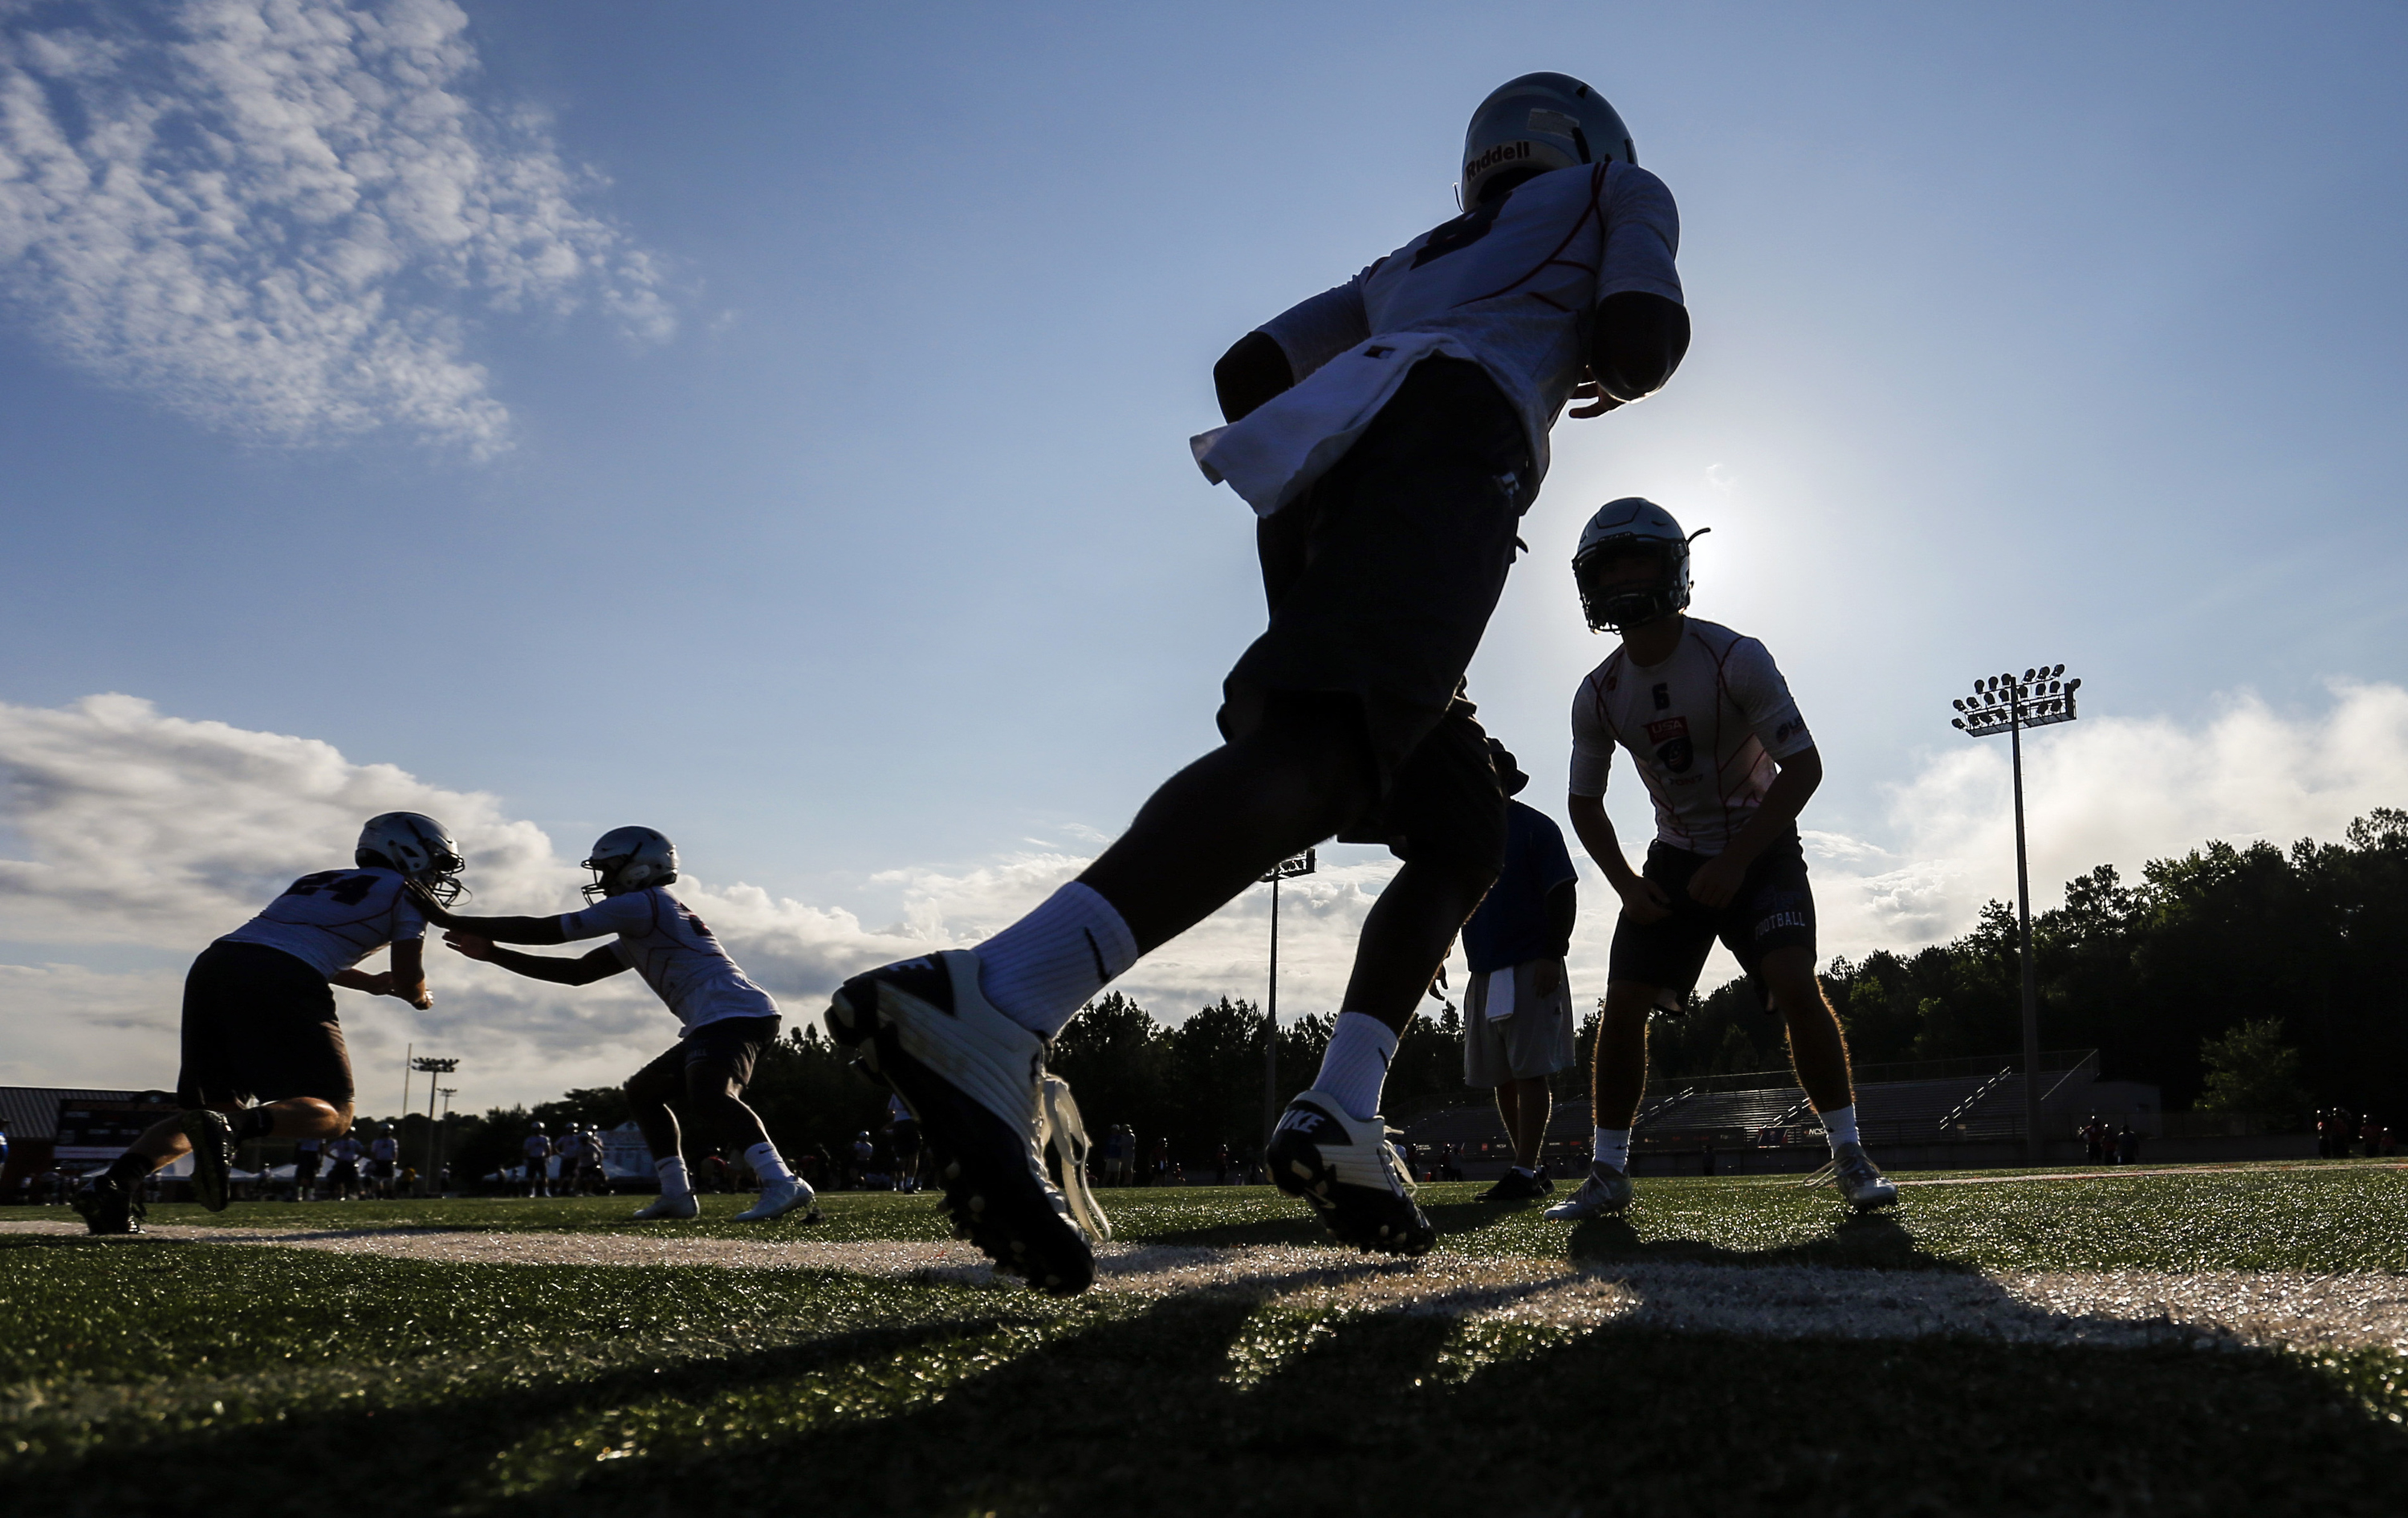 Jul 15, 2016; Hoover, AL, USA; Players from South Forsyth warm up before their game during the USA Football 7on7 National Championship at Hoover high school. Mandatory Credit: Butch Dill-USA TODAY Sports ORG XMIT: USATSI-135185 [Via MerlinFTP Drop]